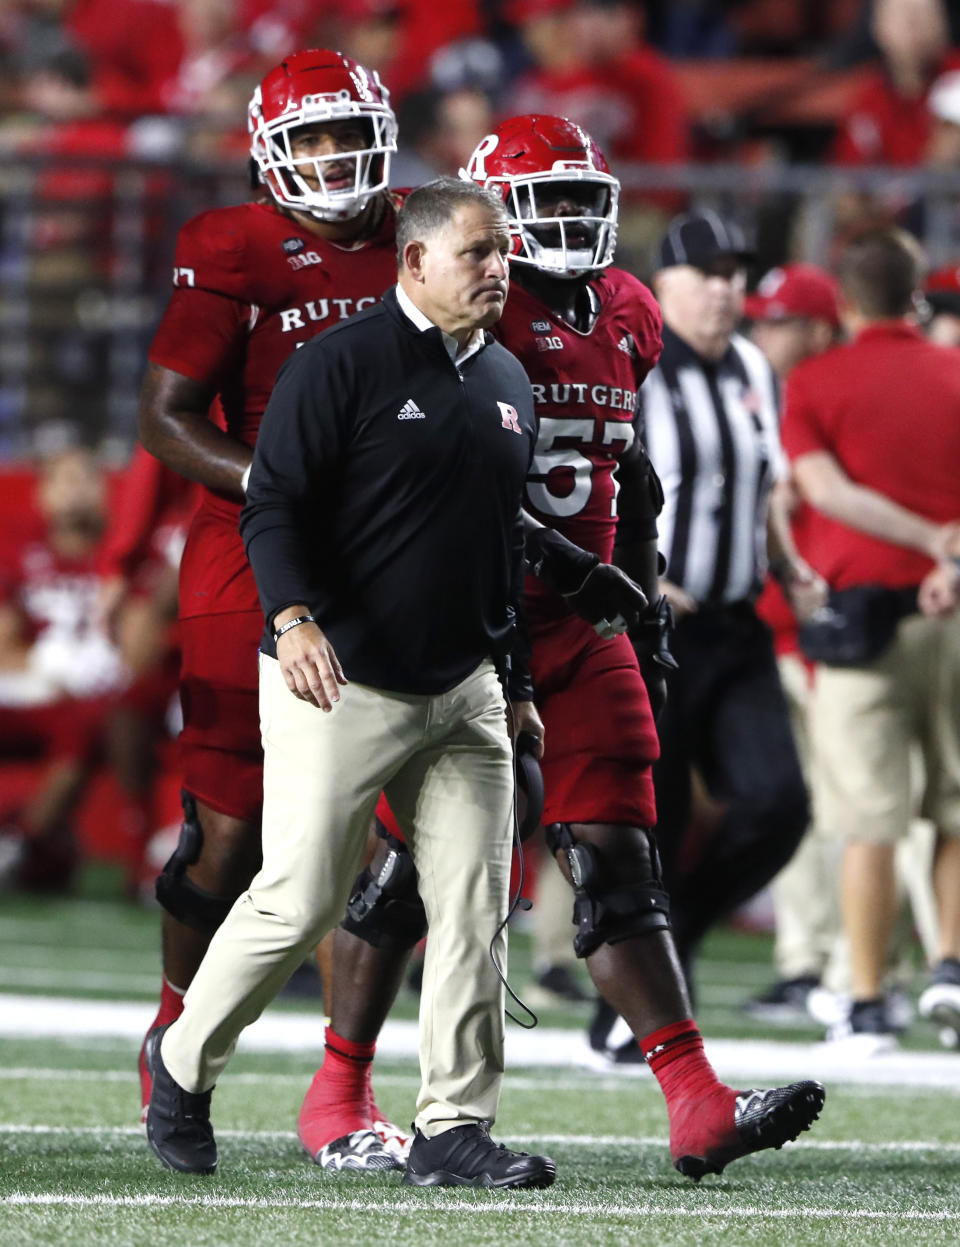 Rutgers head coach Greg Schiano looks on during a second-half timeout during an NCAA college football game against Iowa, Saturday, Sept. 24, 2022, in Piscataway, N.J. (AP Photo/Noah K. Murray)